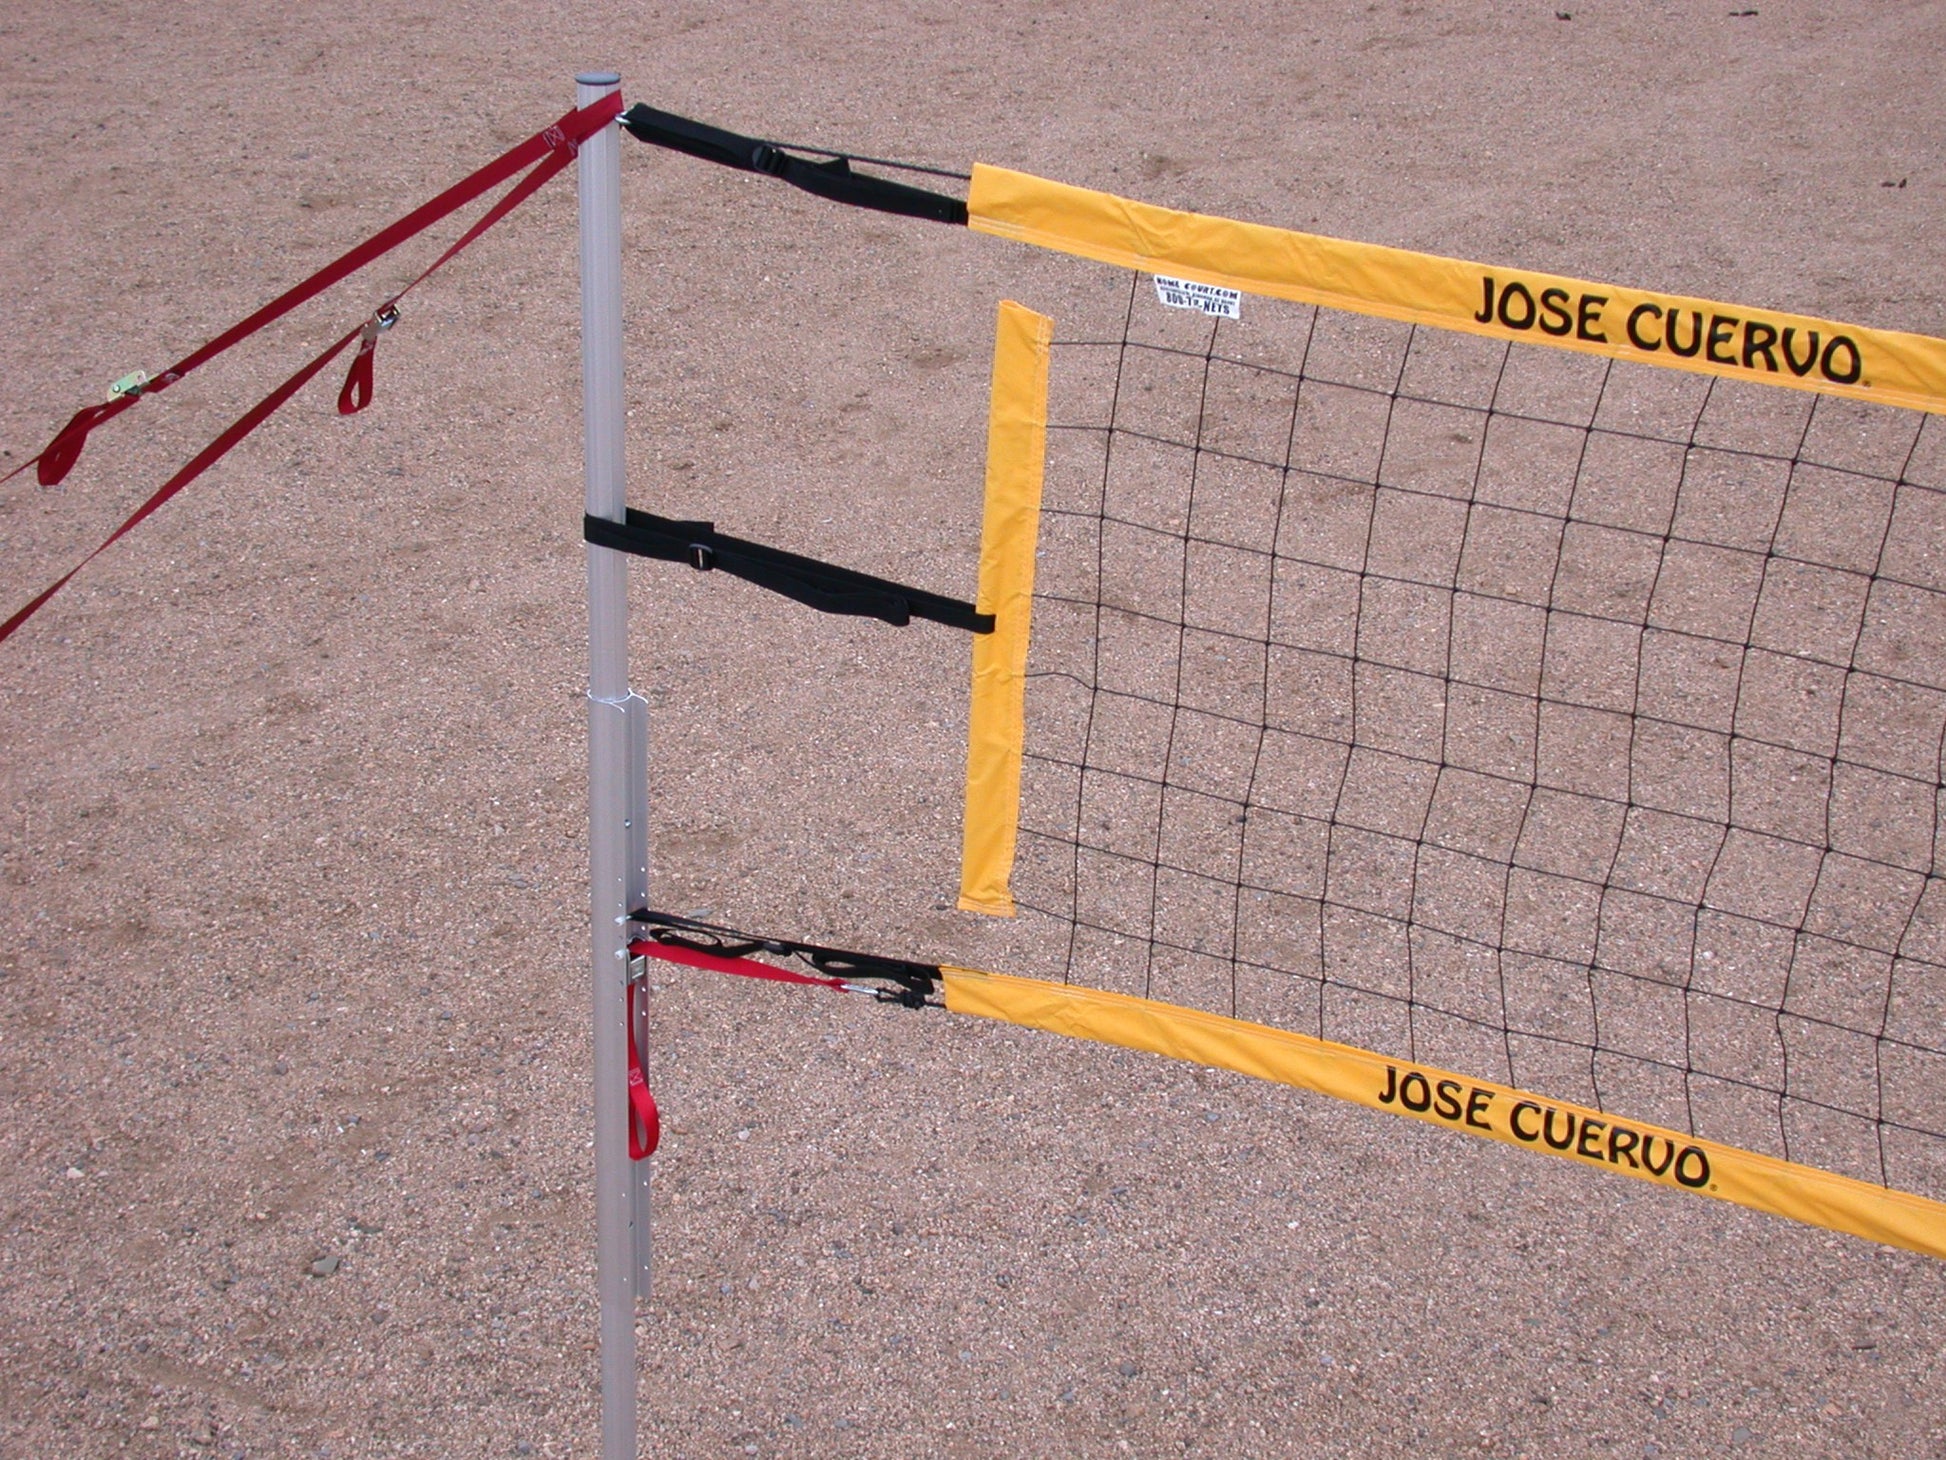 201-JCPNR17-Power Net Portable Volleyball Set, poles, Jose Cuervo net, guy lines, web boundary, stakes & carrying bag